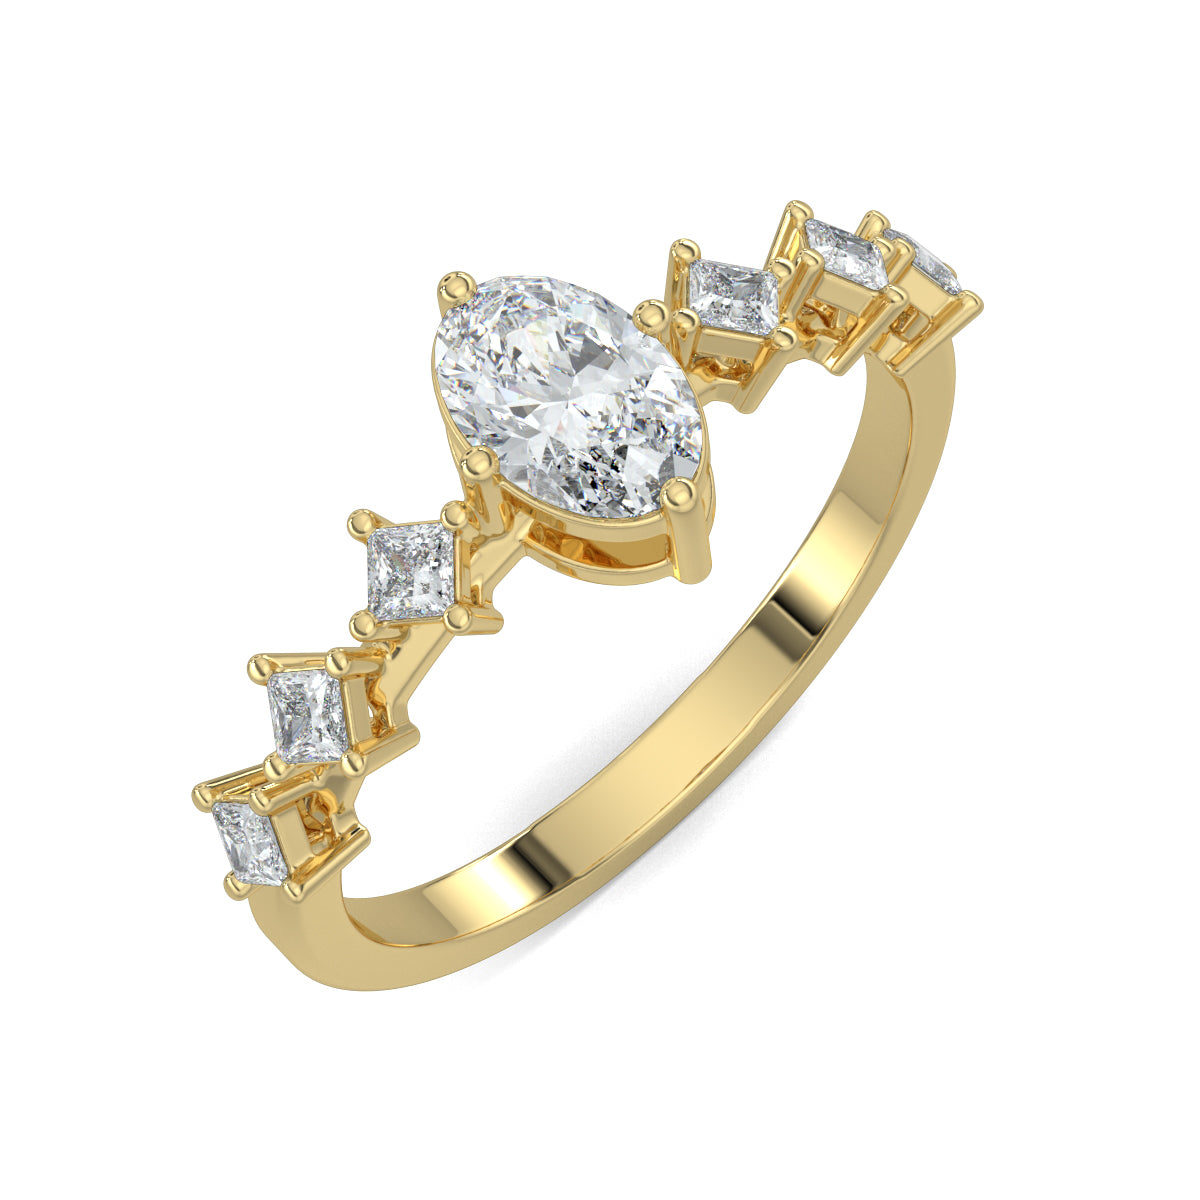 Yellow Gold, Diamond Ring, oval solitaire diamond ring, natural diamonds, lab-grown diamonds, princess band ring, engagement ring, ethical jewelry, diamond jewelry, luxury ring, solitaire ring, oval cut diamond, princess cut diamonds